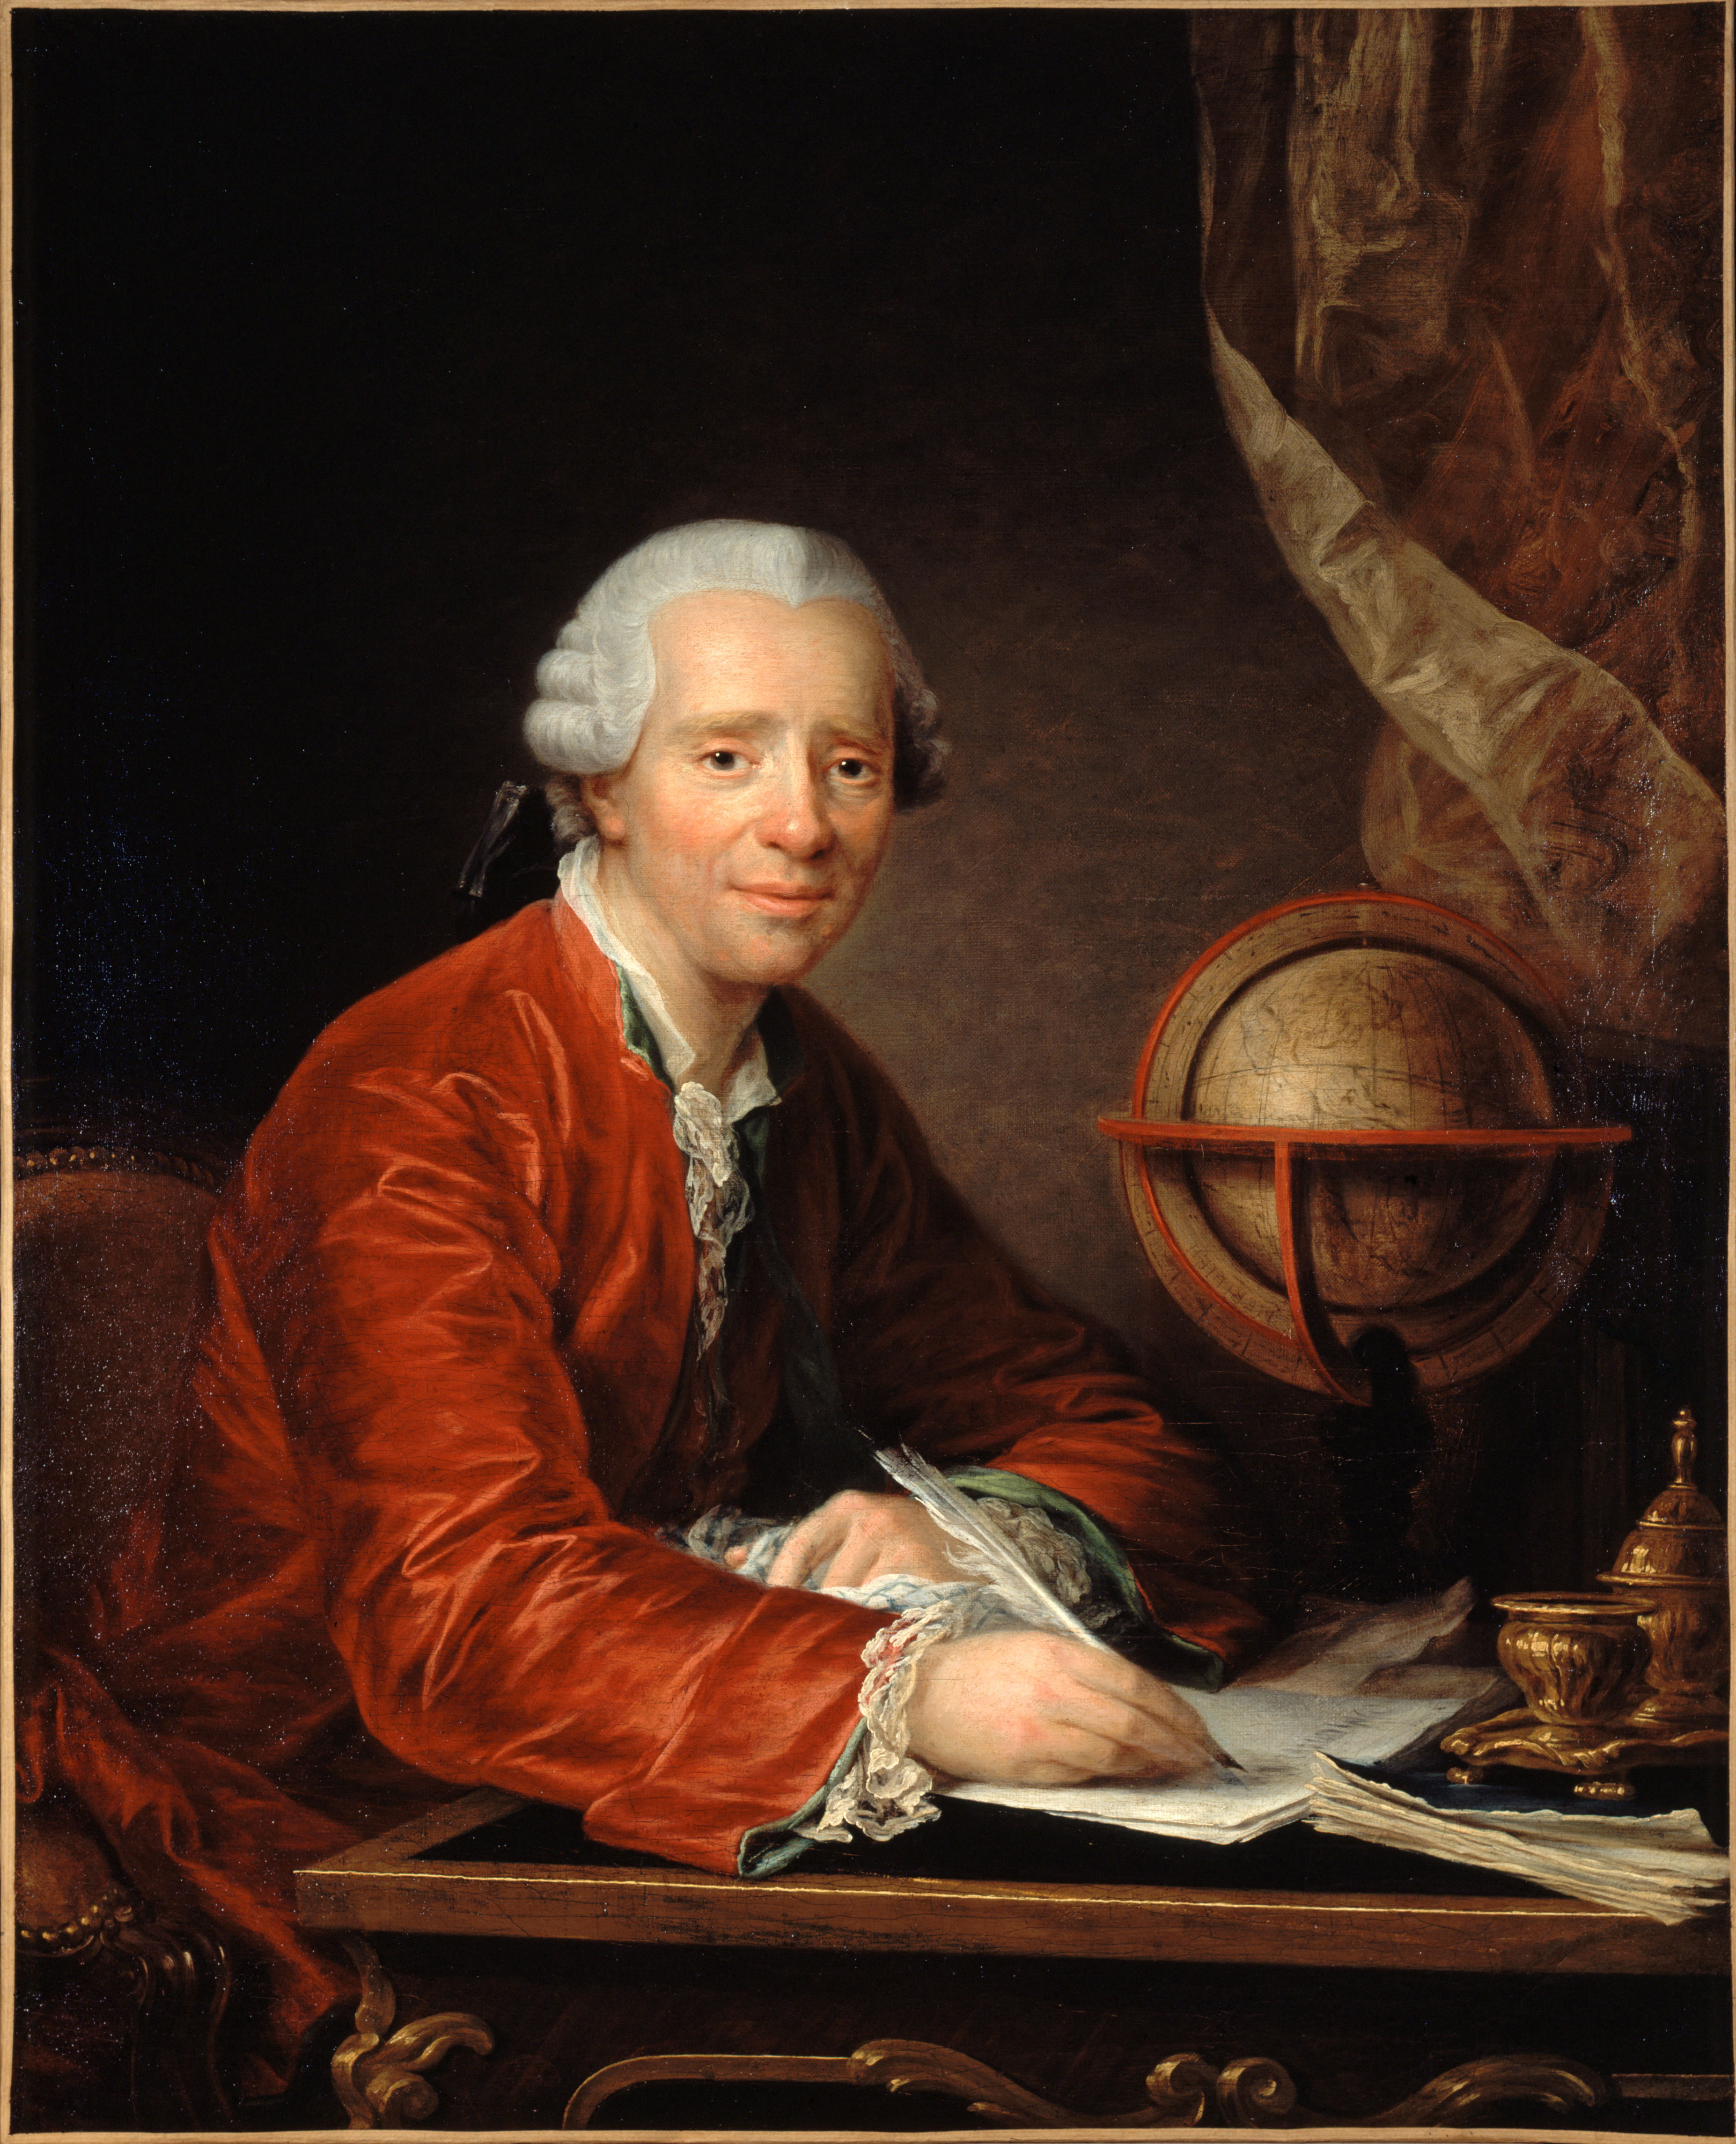 A portrait of a man seated at a desk, looking out directly at the viewer with a slight smile. He is finely dressed and sits in an nicely appointed eighteenth-century interior, with a globe on his desk as well as other gold ornaments. He holds a feathered quill and puts it to paper, as though he has just been caught in a moment of composition. 